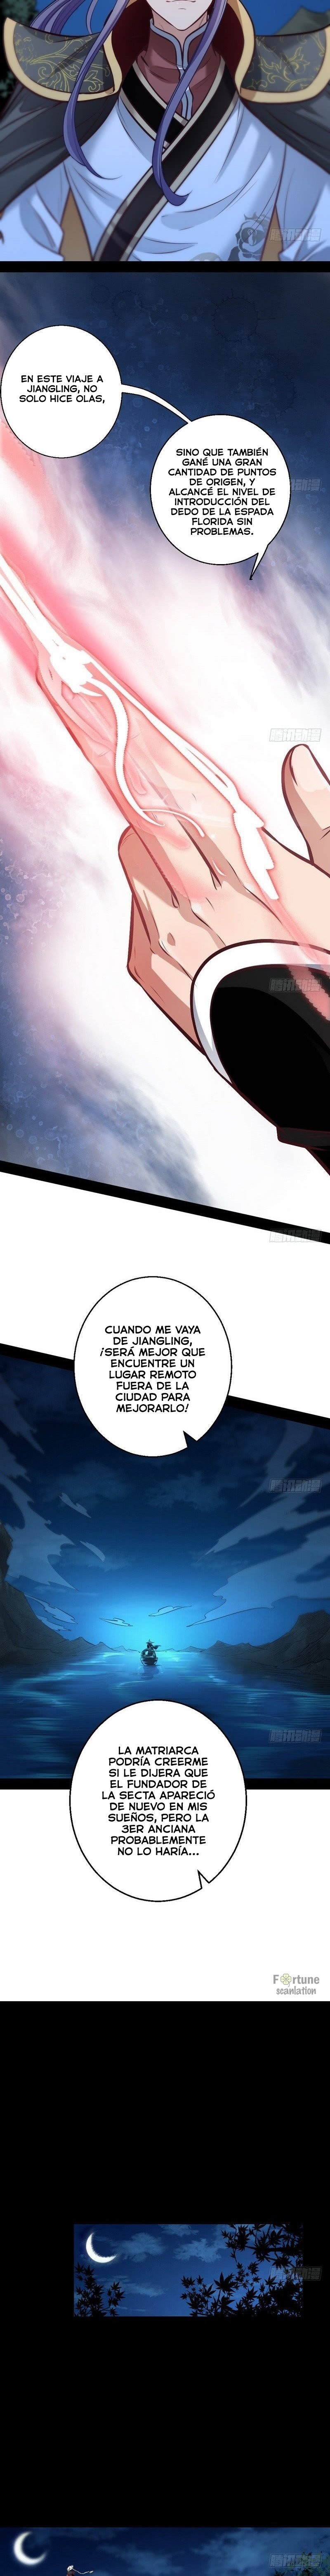 Manga Soy un dios maligno Chapter 30 image number 18